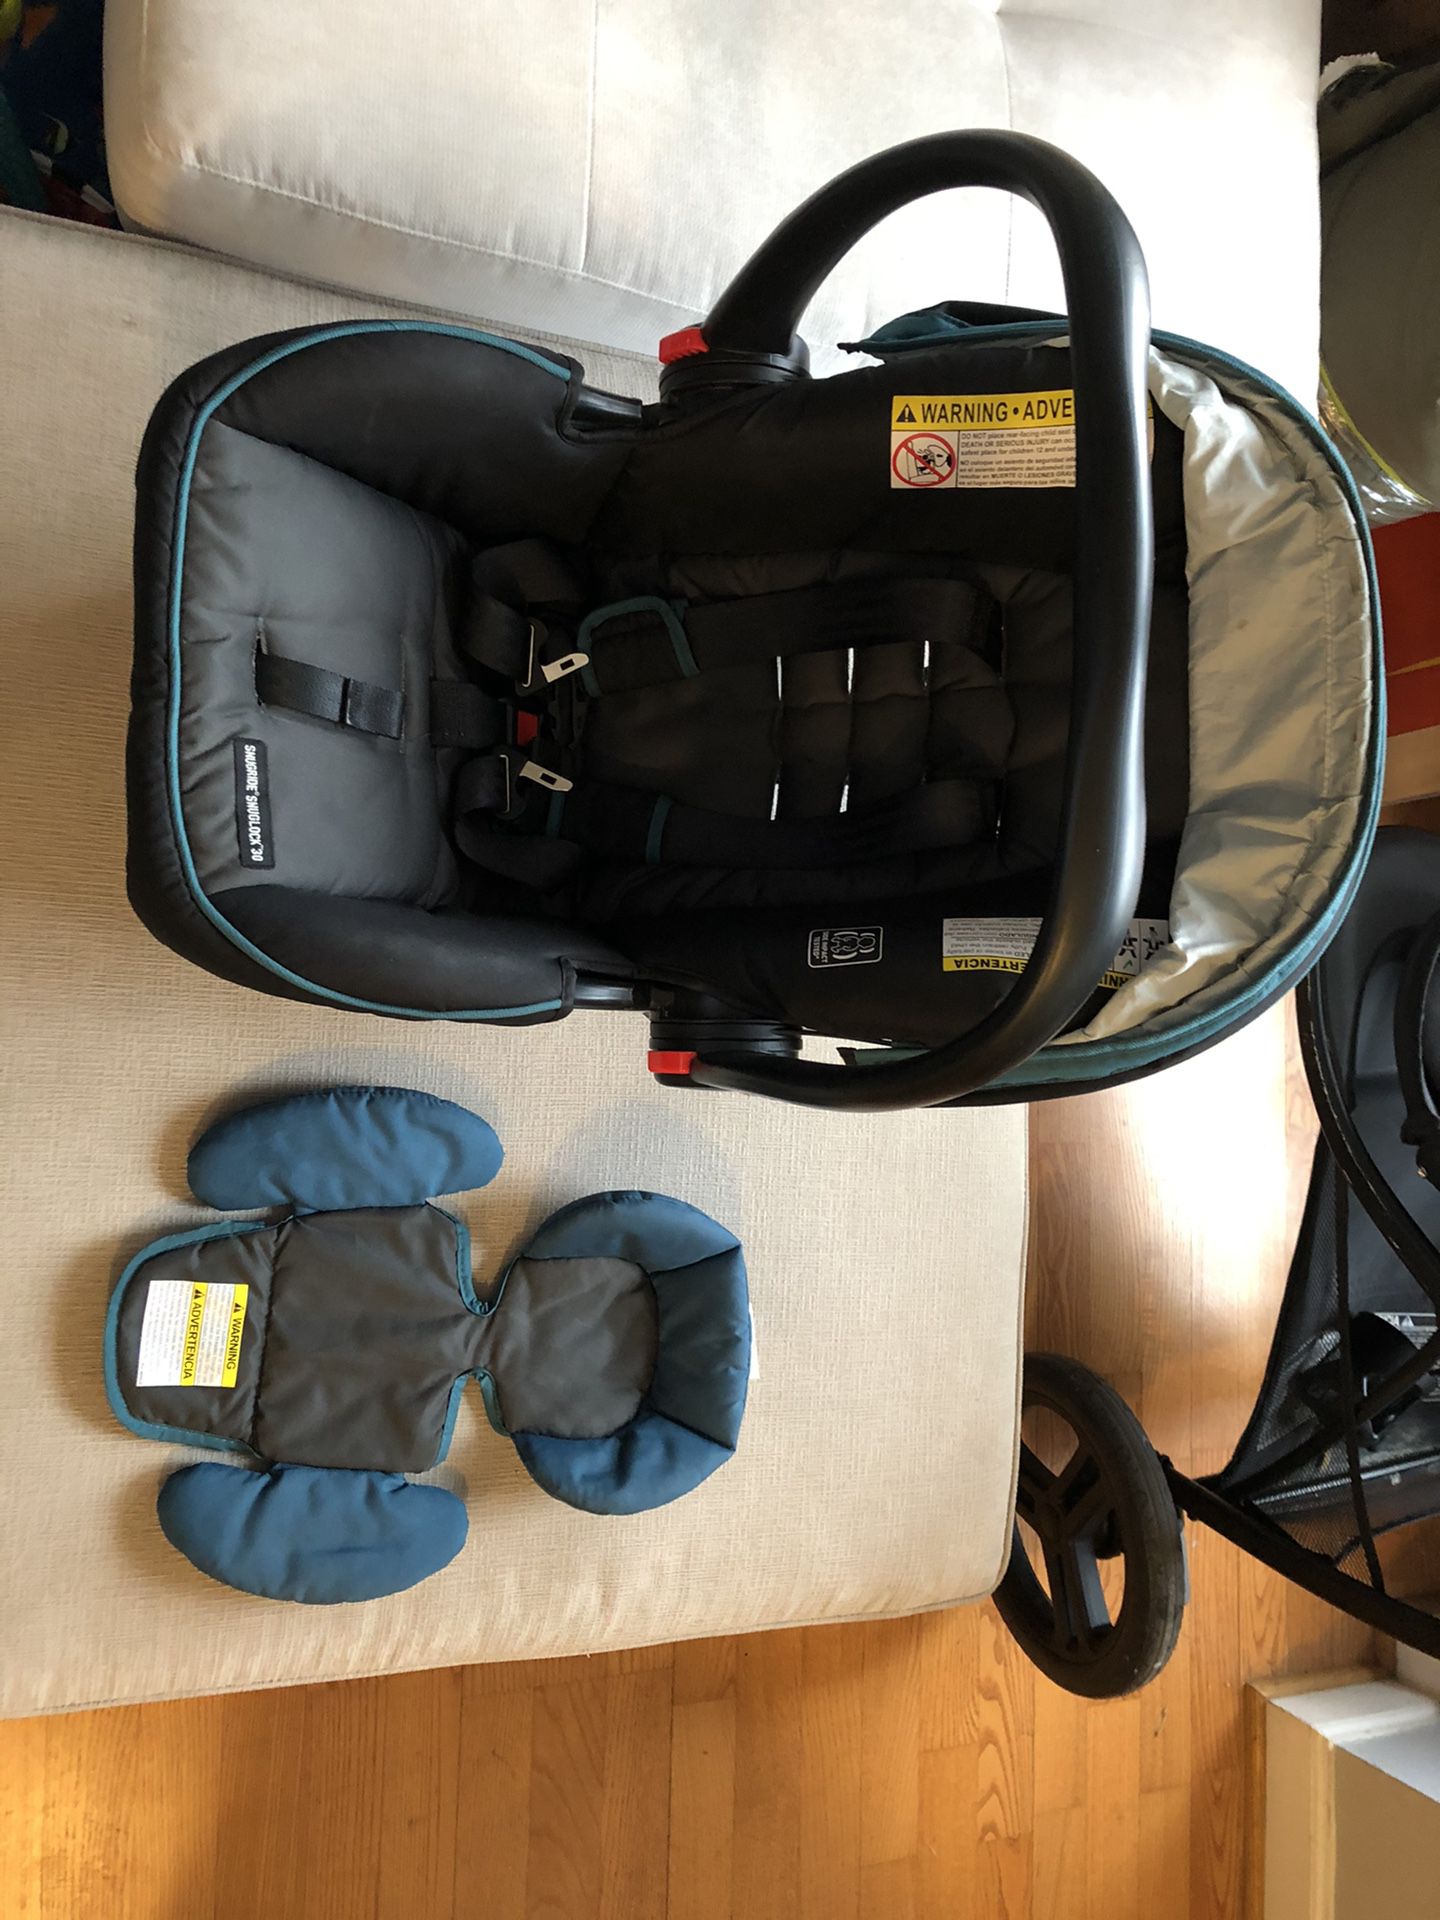 Graco Car seat, base and stroller